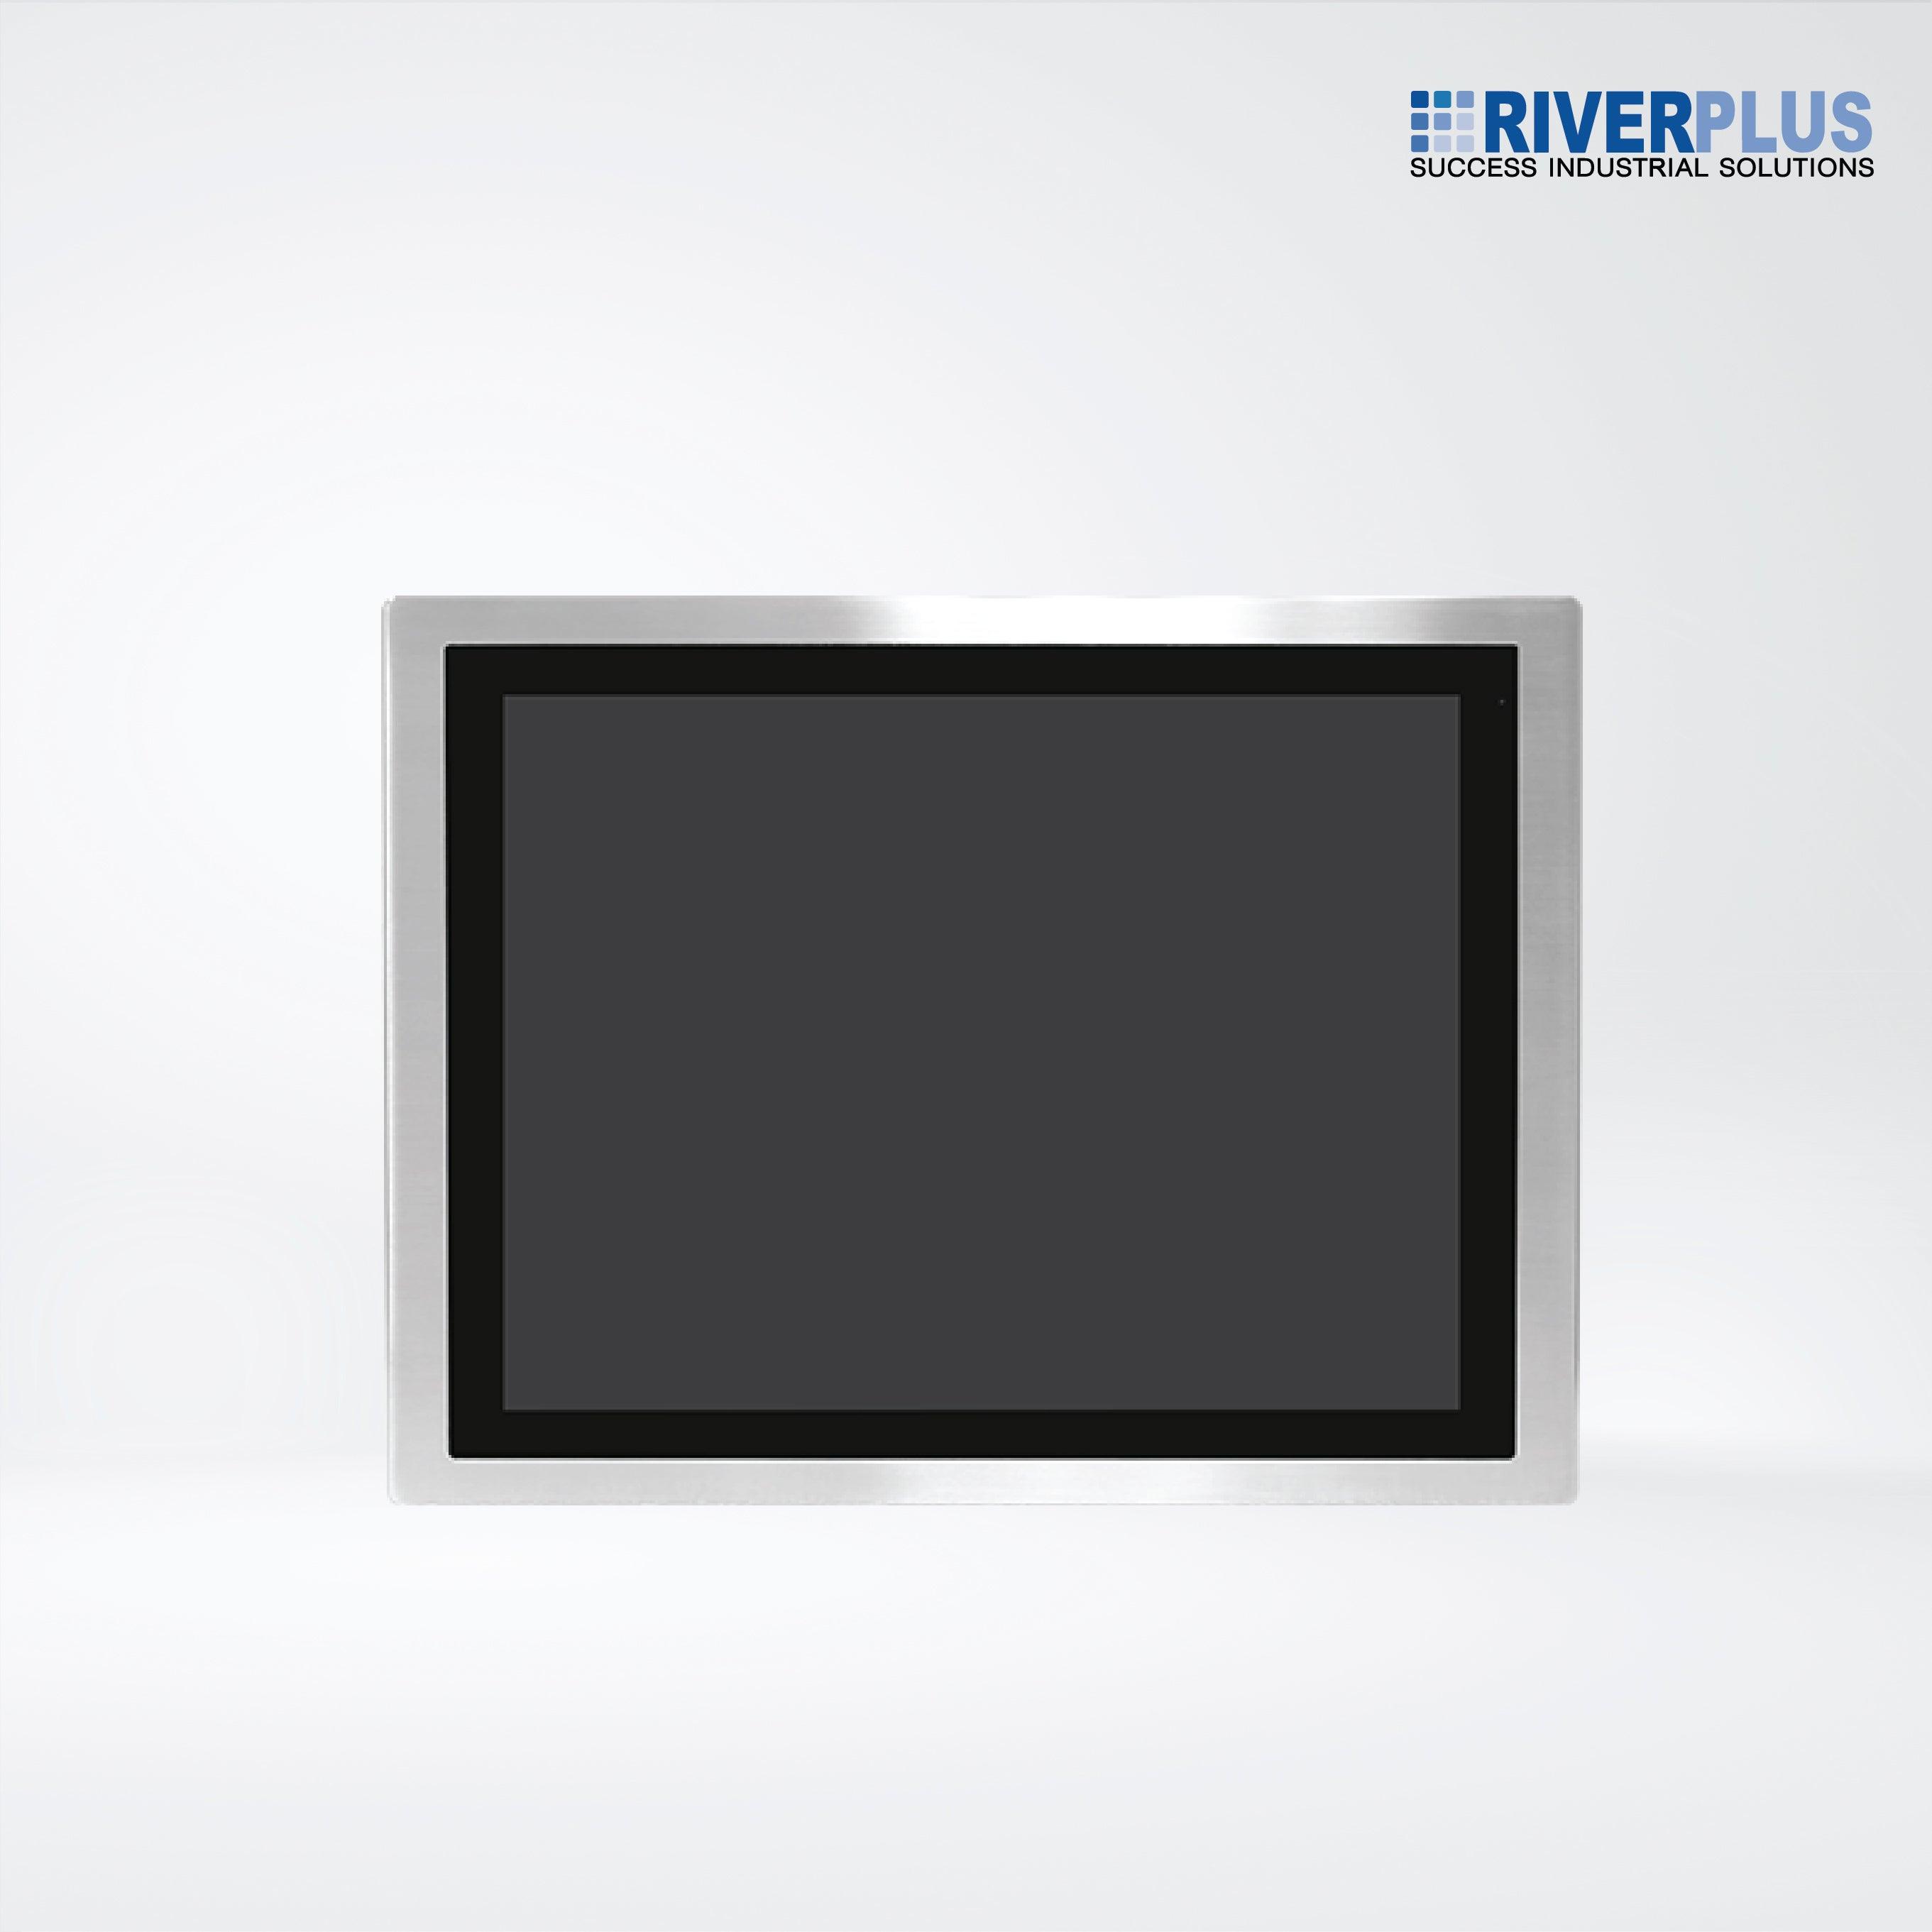 FABS-119RH 19” Flat Front Panel IP66 Stainless Chassis Display - Riverplus